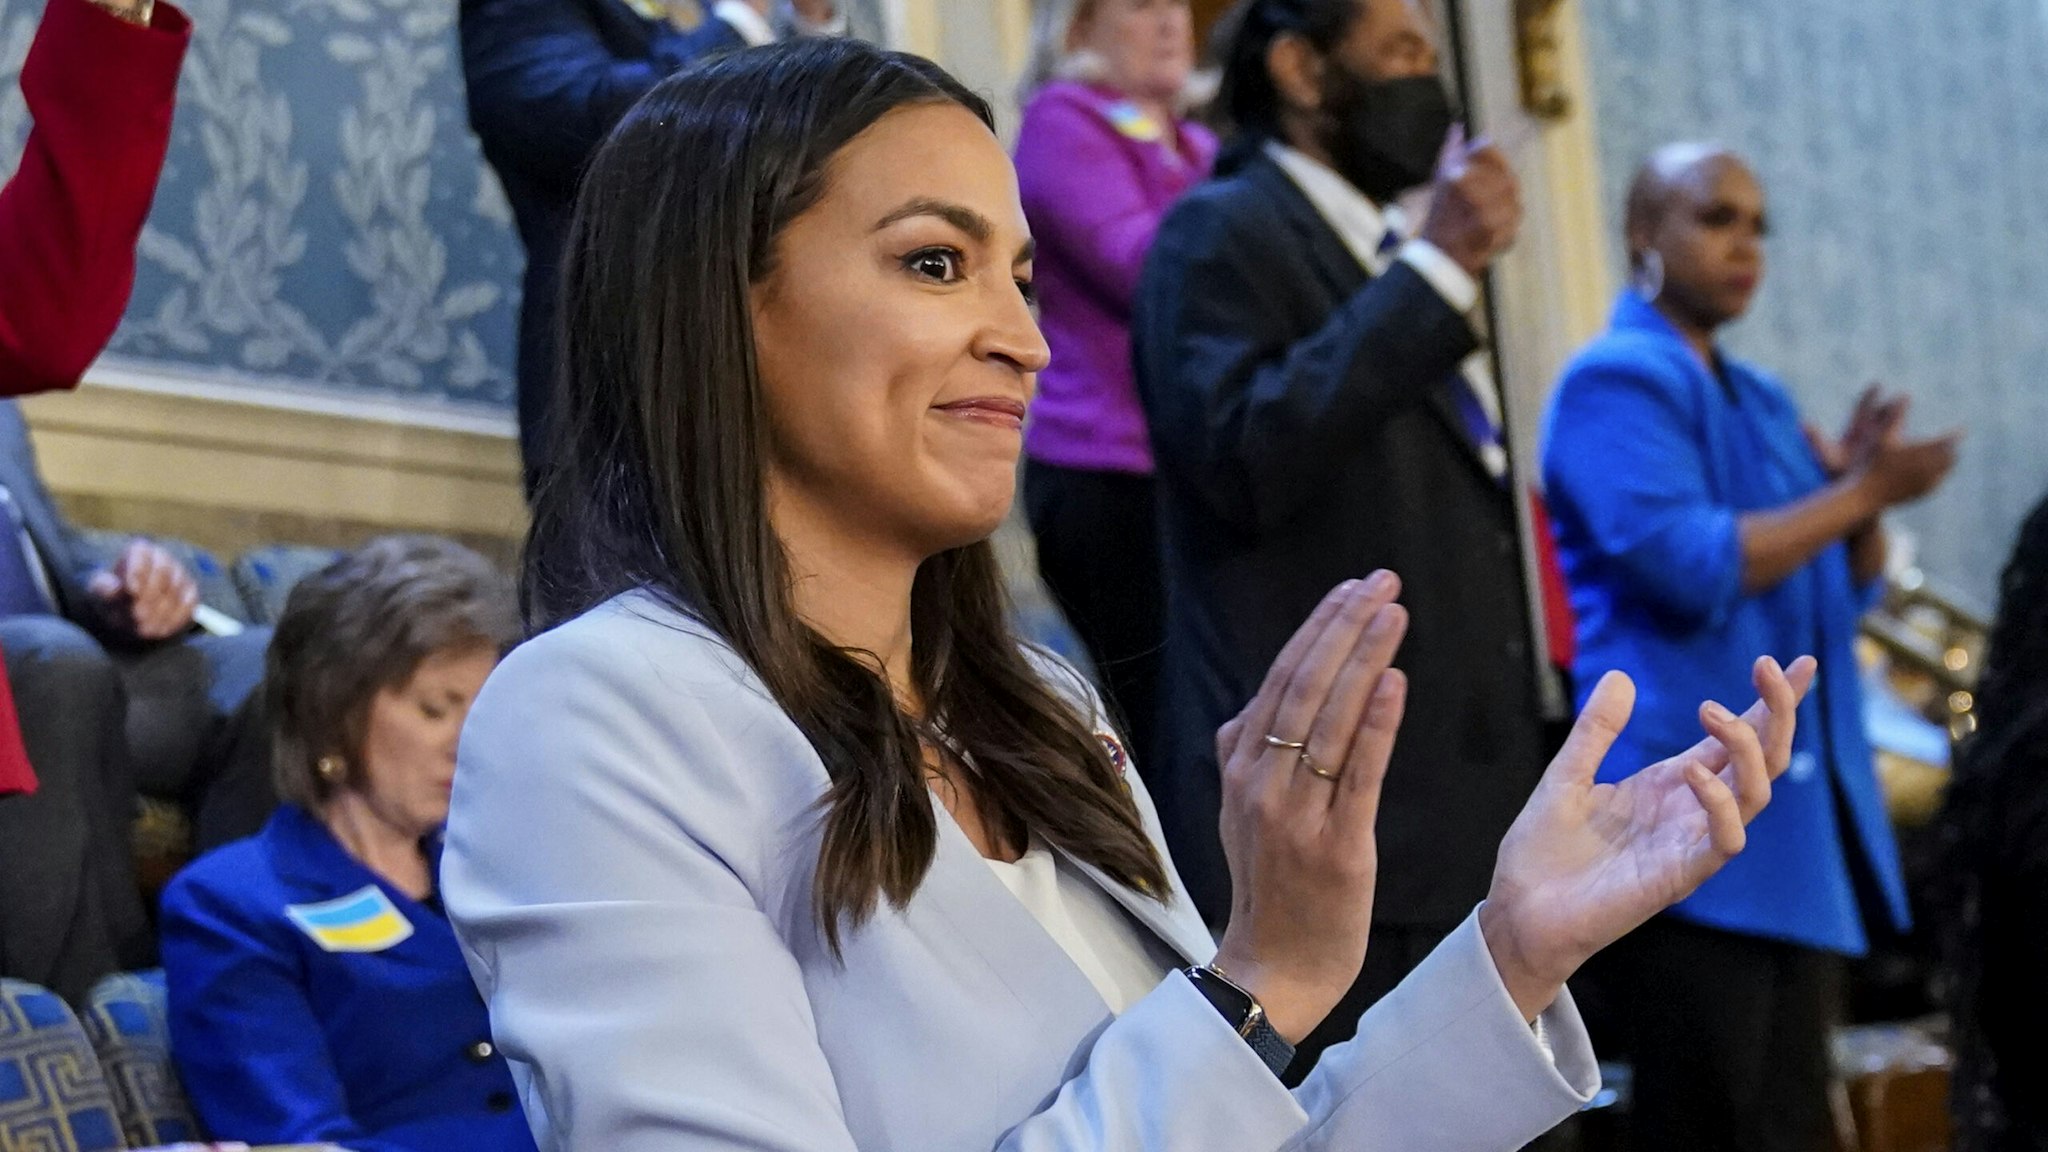 WASHINGTON, DC - MARCH 01: U.S. Rep. Alexandria Ocasio-Cortez (D-NY) claps as U.S. President Joe Biden delivers the State of the Union address flanked by Vice President Kamala Harris and House Speaker Nancy Pelosi (D-CA) during a joint session of Congress in the U.S. Capitol’s House Chamber on March 01, 2022 in Washington, DC. During his first State of the Union address, Biden spoke on his administration’s efforts to lead a global response to the Russian invasion of Ukraine, efforts to curb inflation and bringing the country out of the COVID-19 pandemic.